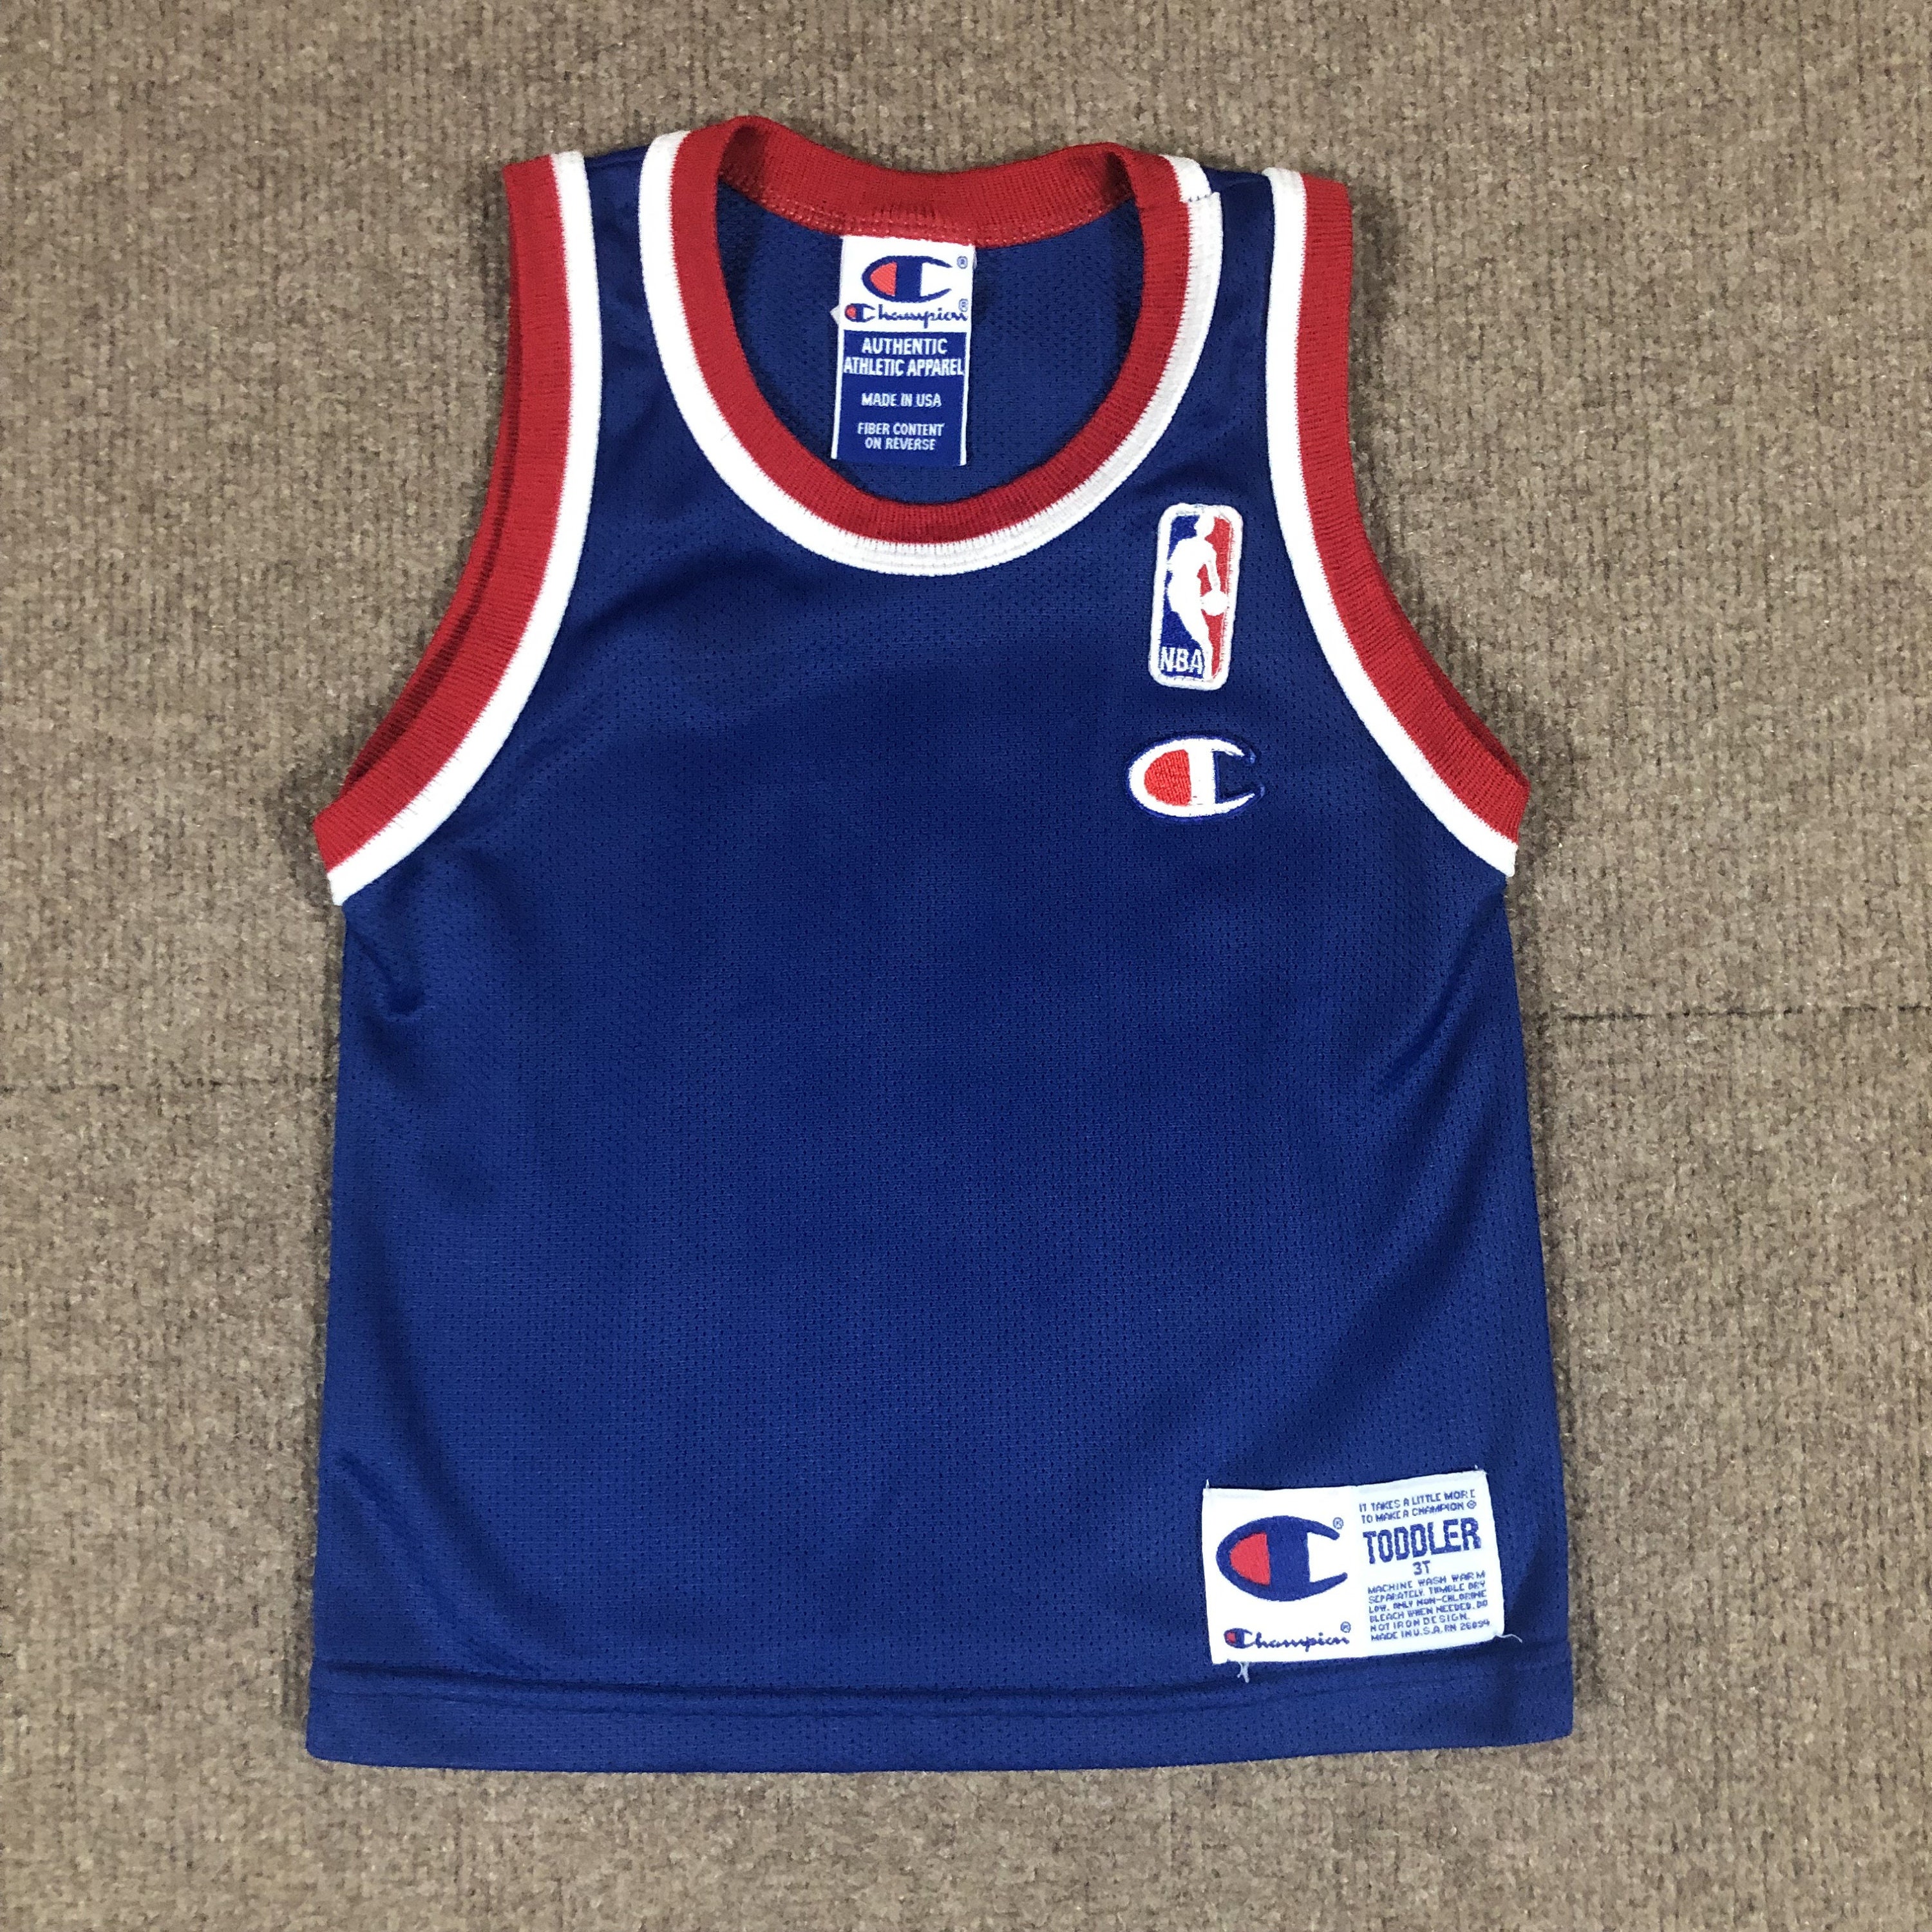 Vintage Blank Champion Basketball Jersey Tank Top Shirt Youth Large Adult  Small